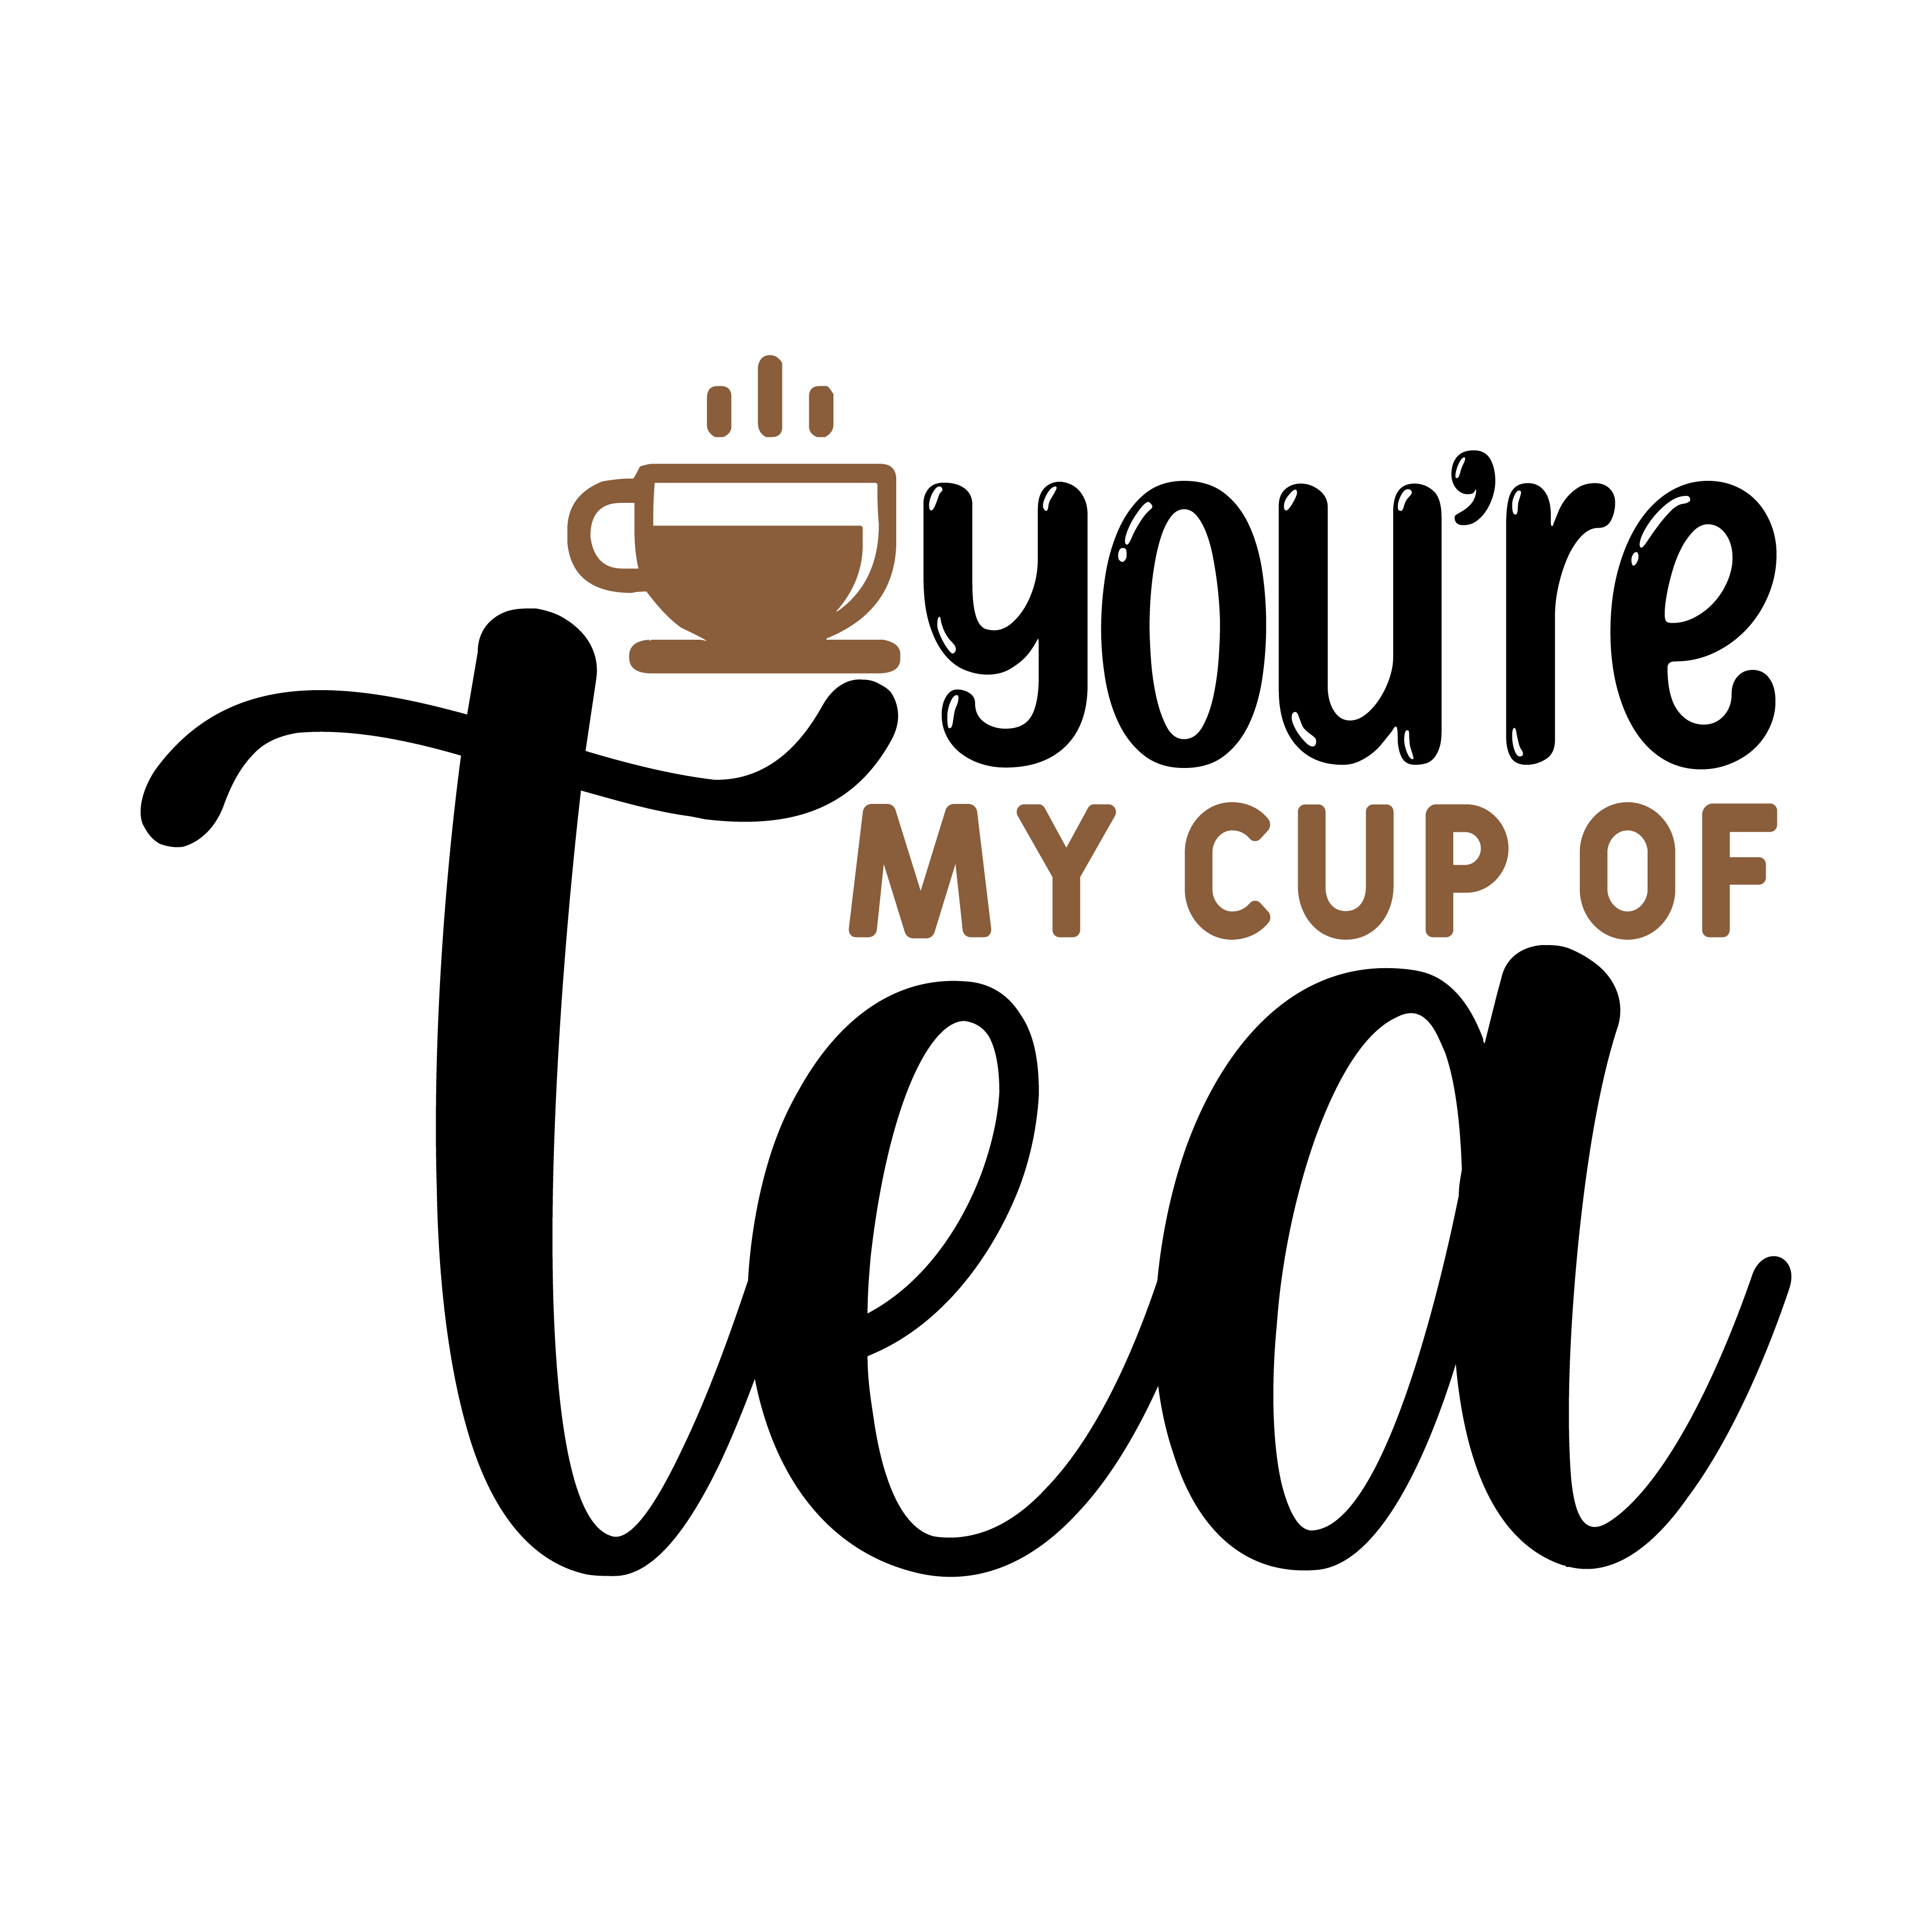 you re my cup of tea, tea sayings, tea quotes, Cricut designs, free, clip art, svg file, template, pattern, stencil, silhouette, cut file, design space, short, funny, shirt, cup, DIY crafts and projects, embroidery